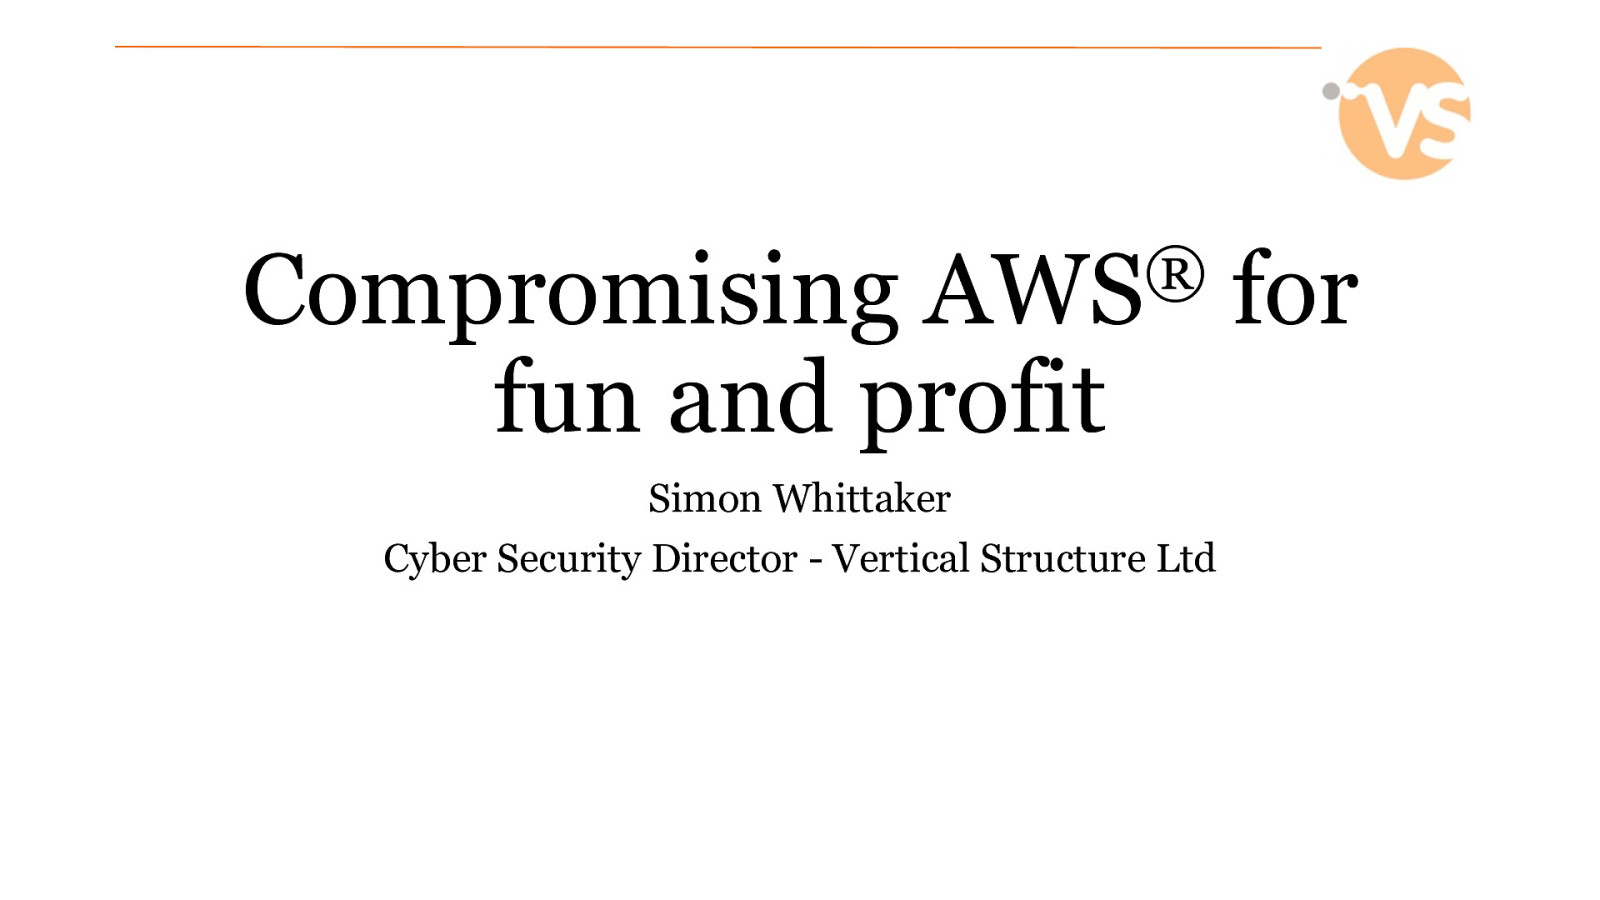 Compromising AWS for fun and profit